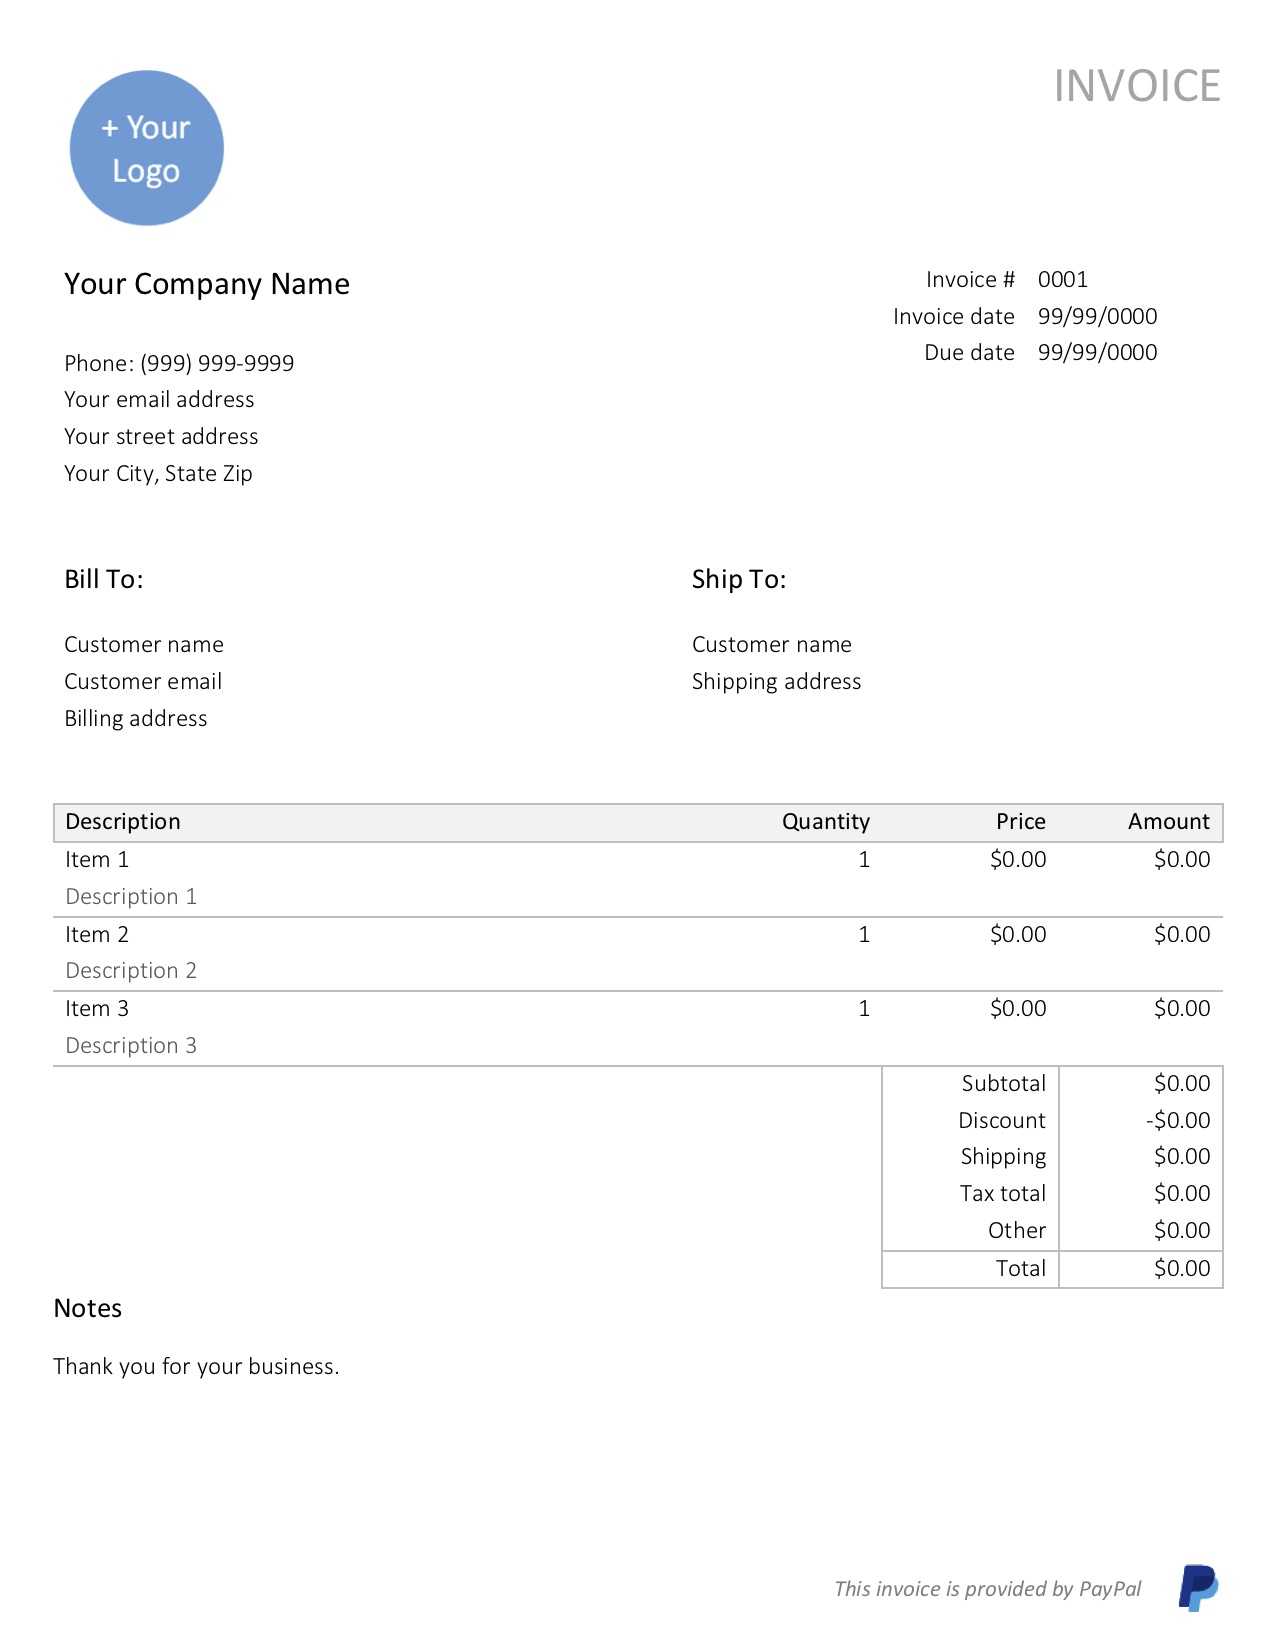 Free, Downloadable Sample Invoice Template | Paypal With Regard To Credit Card Bill Template